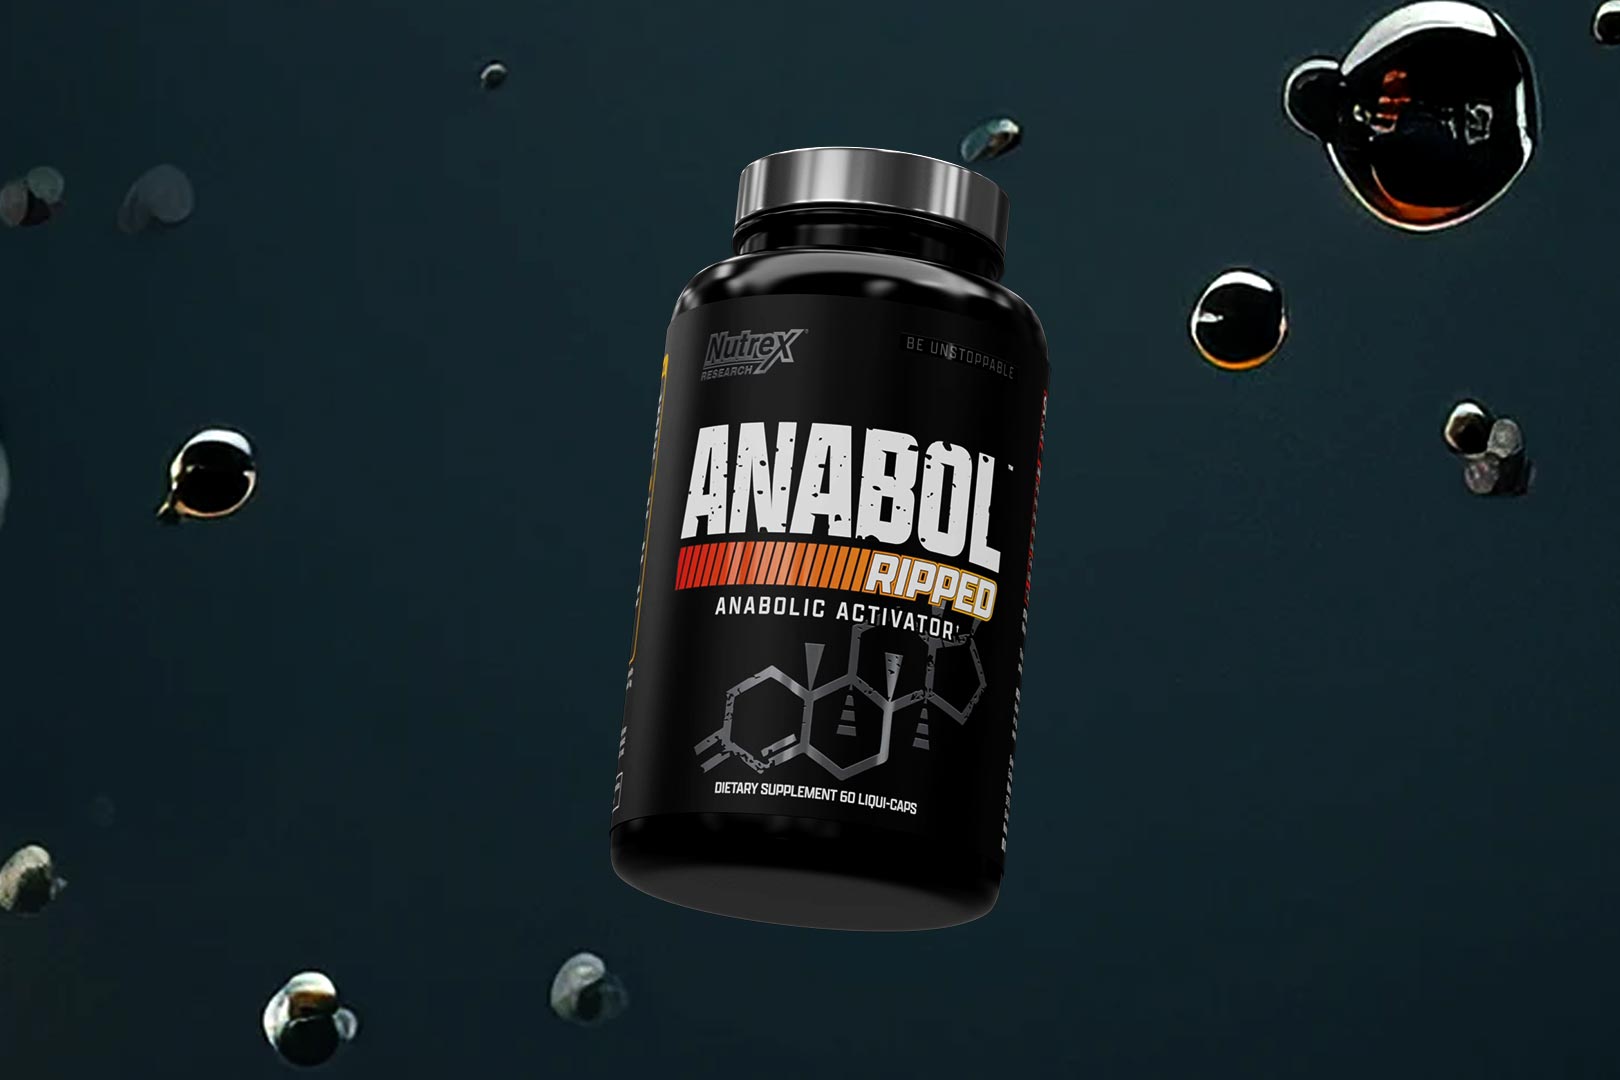 Nutrex Anabol Ripped